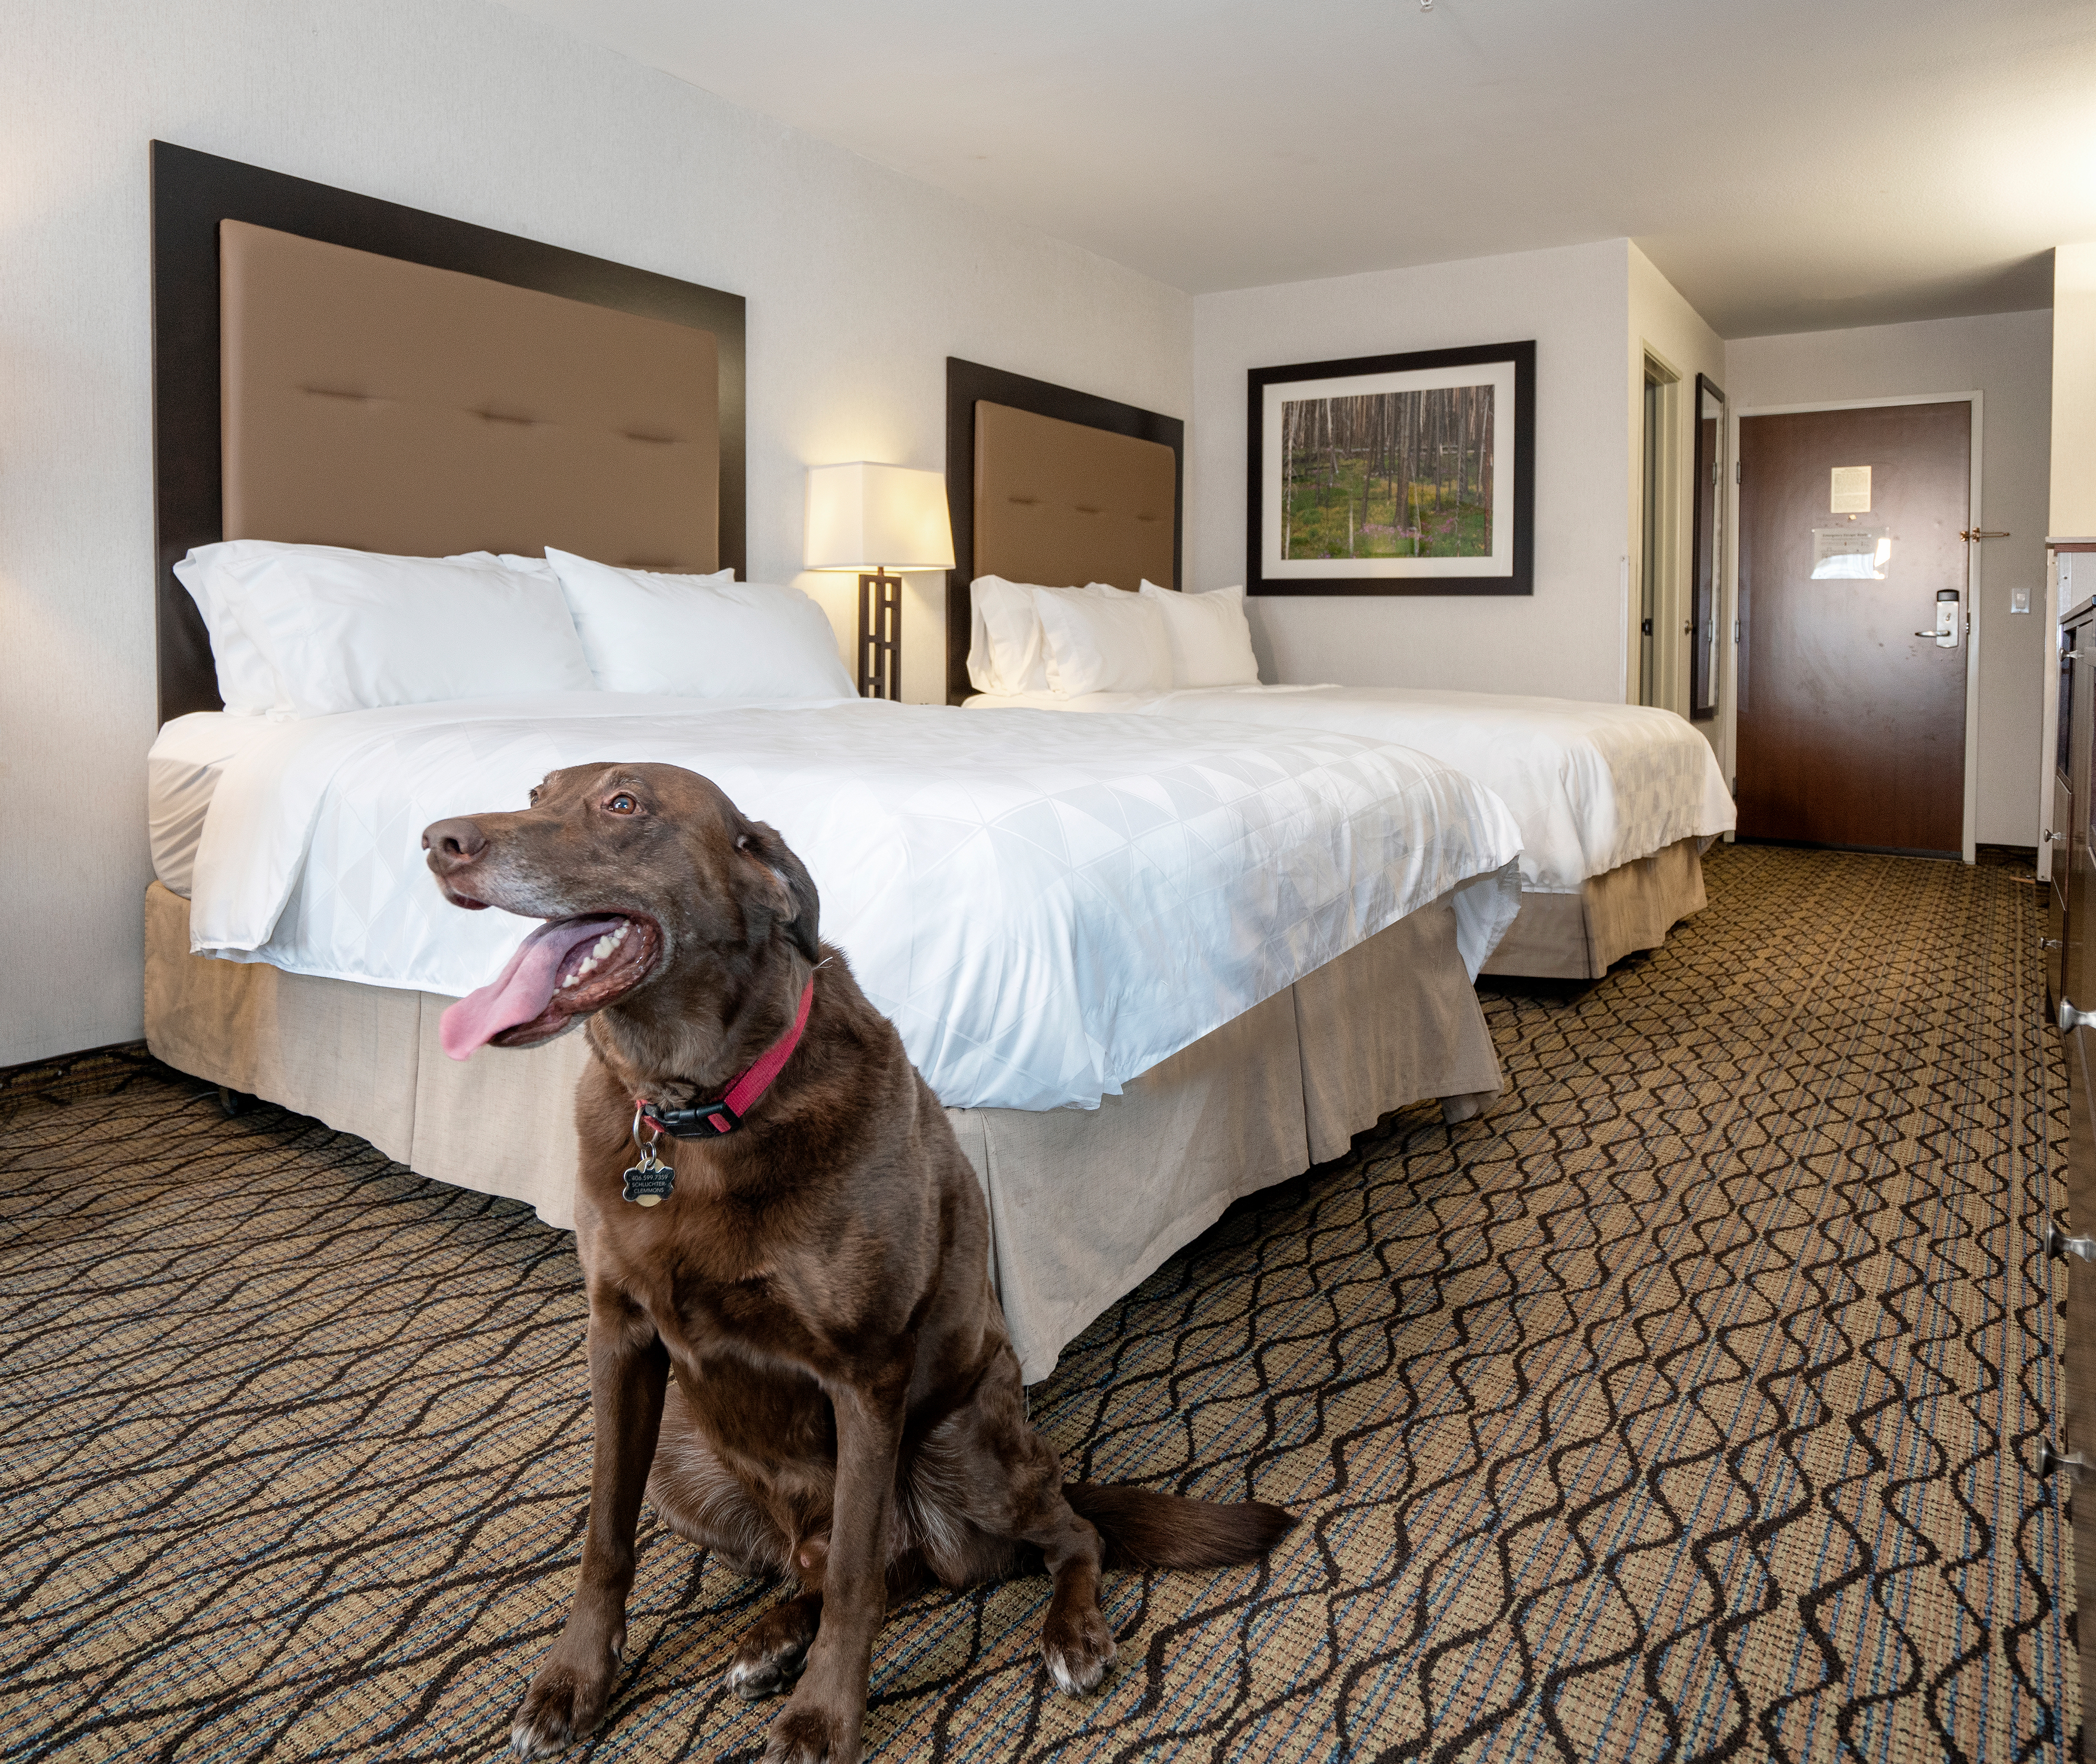 A dog sitting in a pet-friendly room at the Holiday Inn West Yellowstone